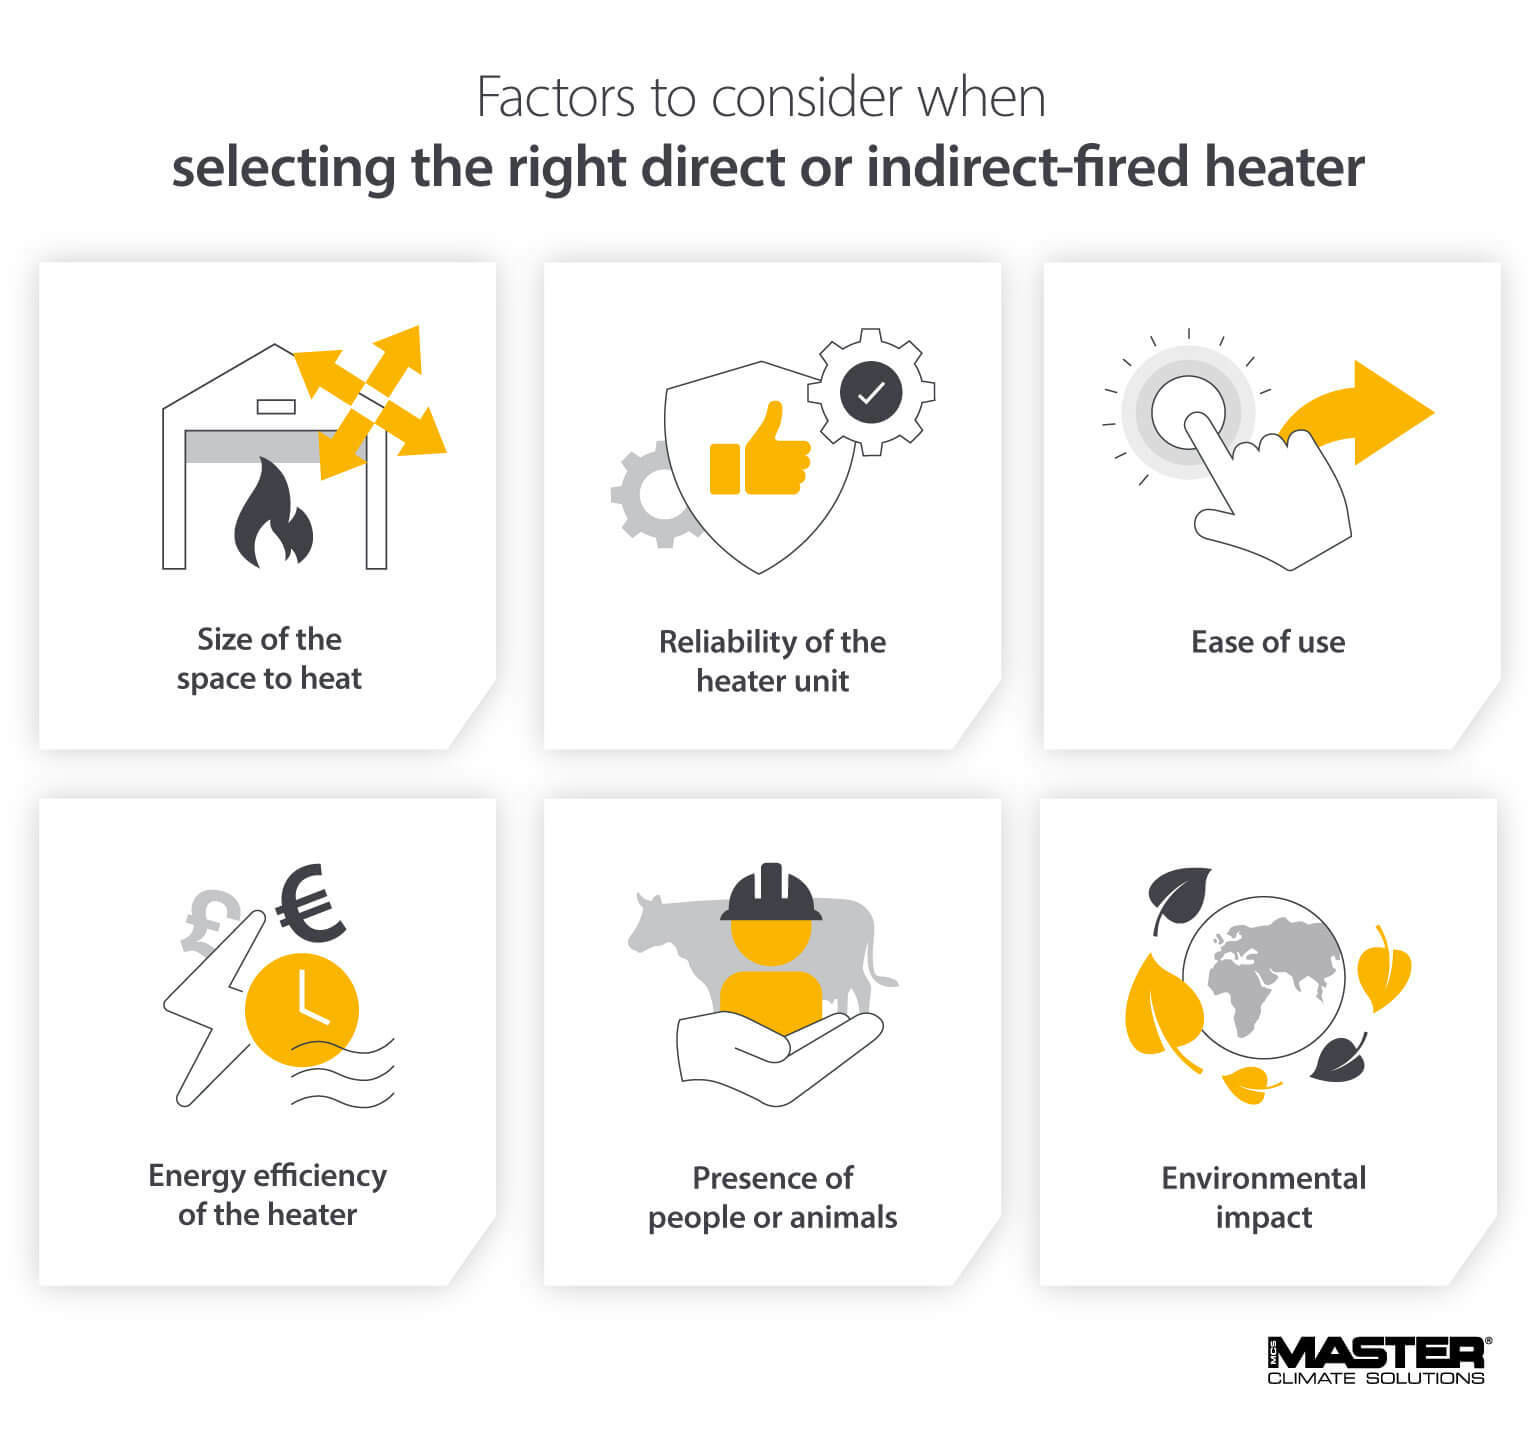 Factors to consider when buying direct or indirect fired heaters - Image and infographic